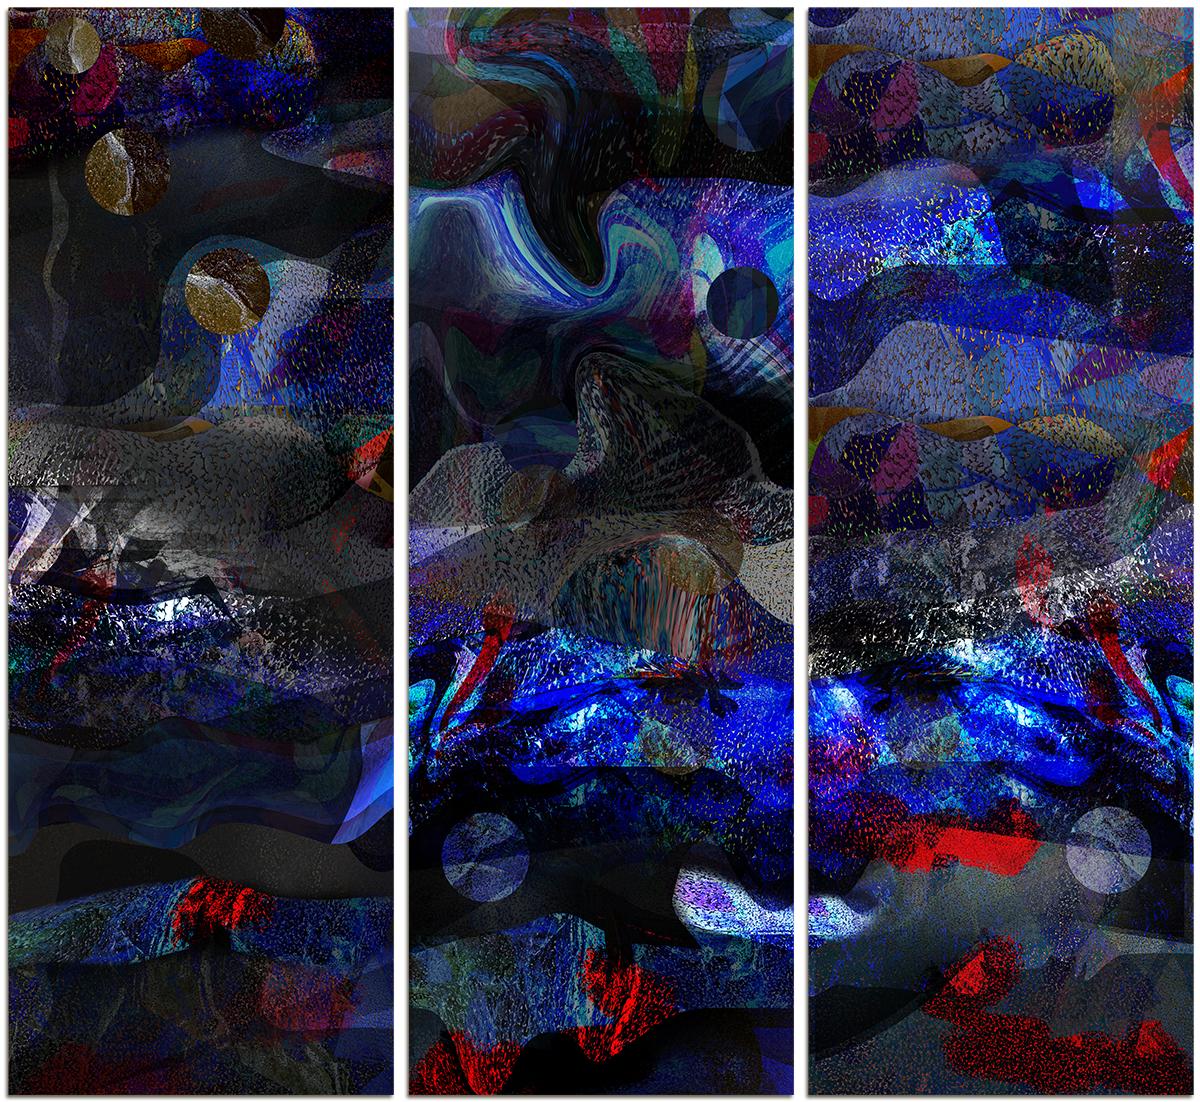 "Cosmic Explorations #2" - Abstract vertical photomontage in cool colors.